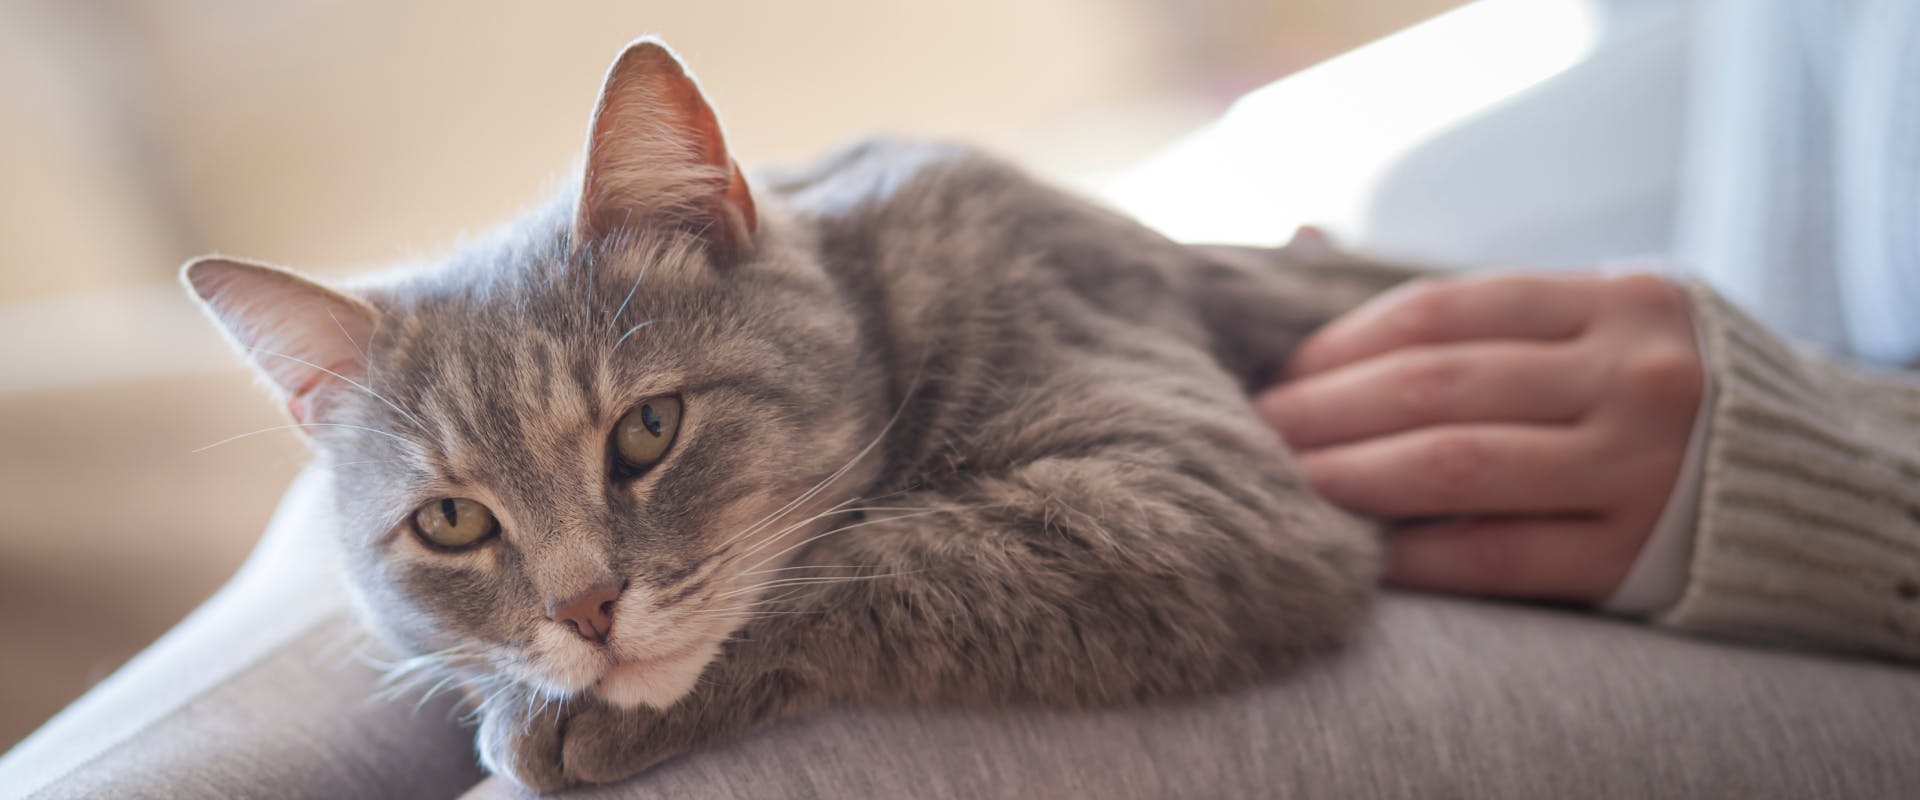 a gray tabby cat enjoying a cuddle and stroke on a cat sitter's lap